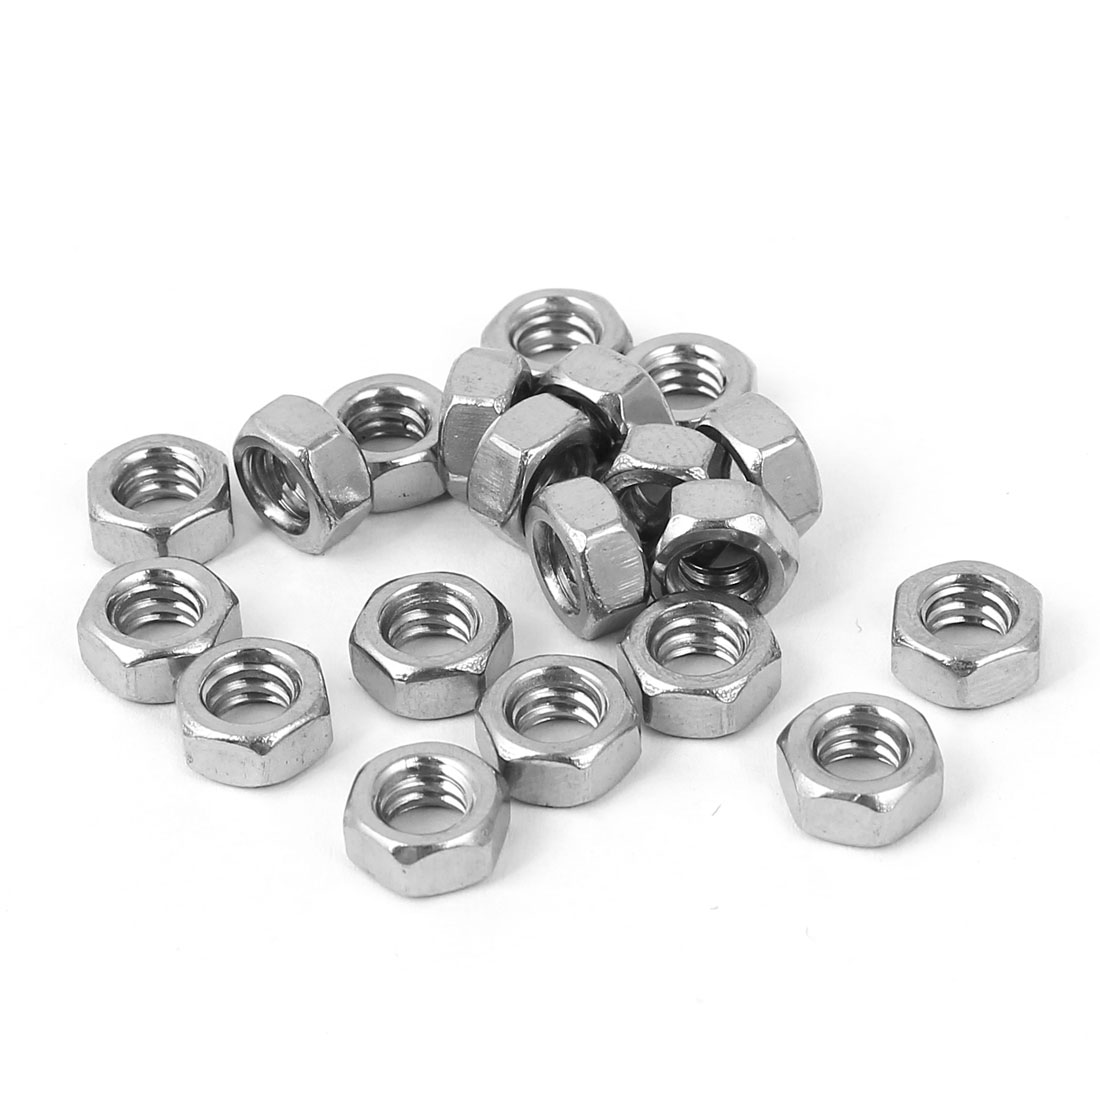 uxcell 3//16-24 Stainless Steel Dome Head Cap Acorn Hex Nuts 25Pcs a15072100ux0289